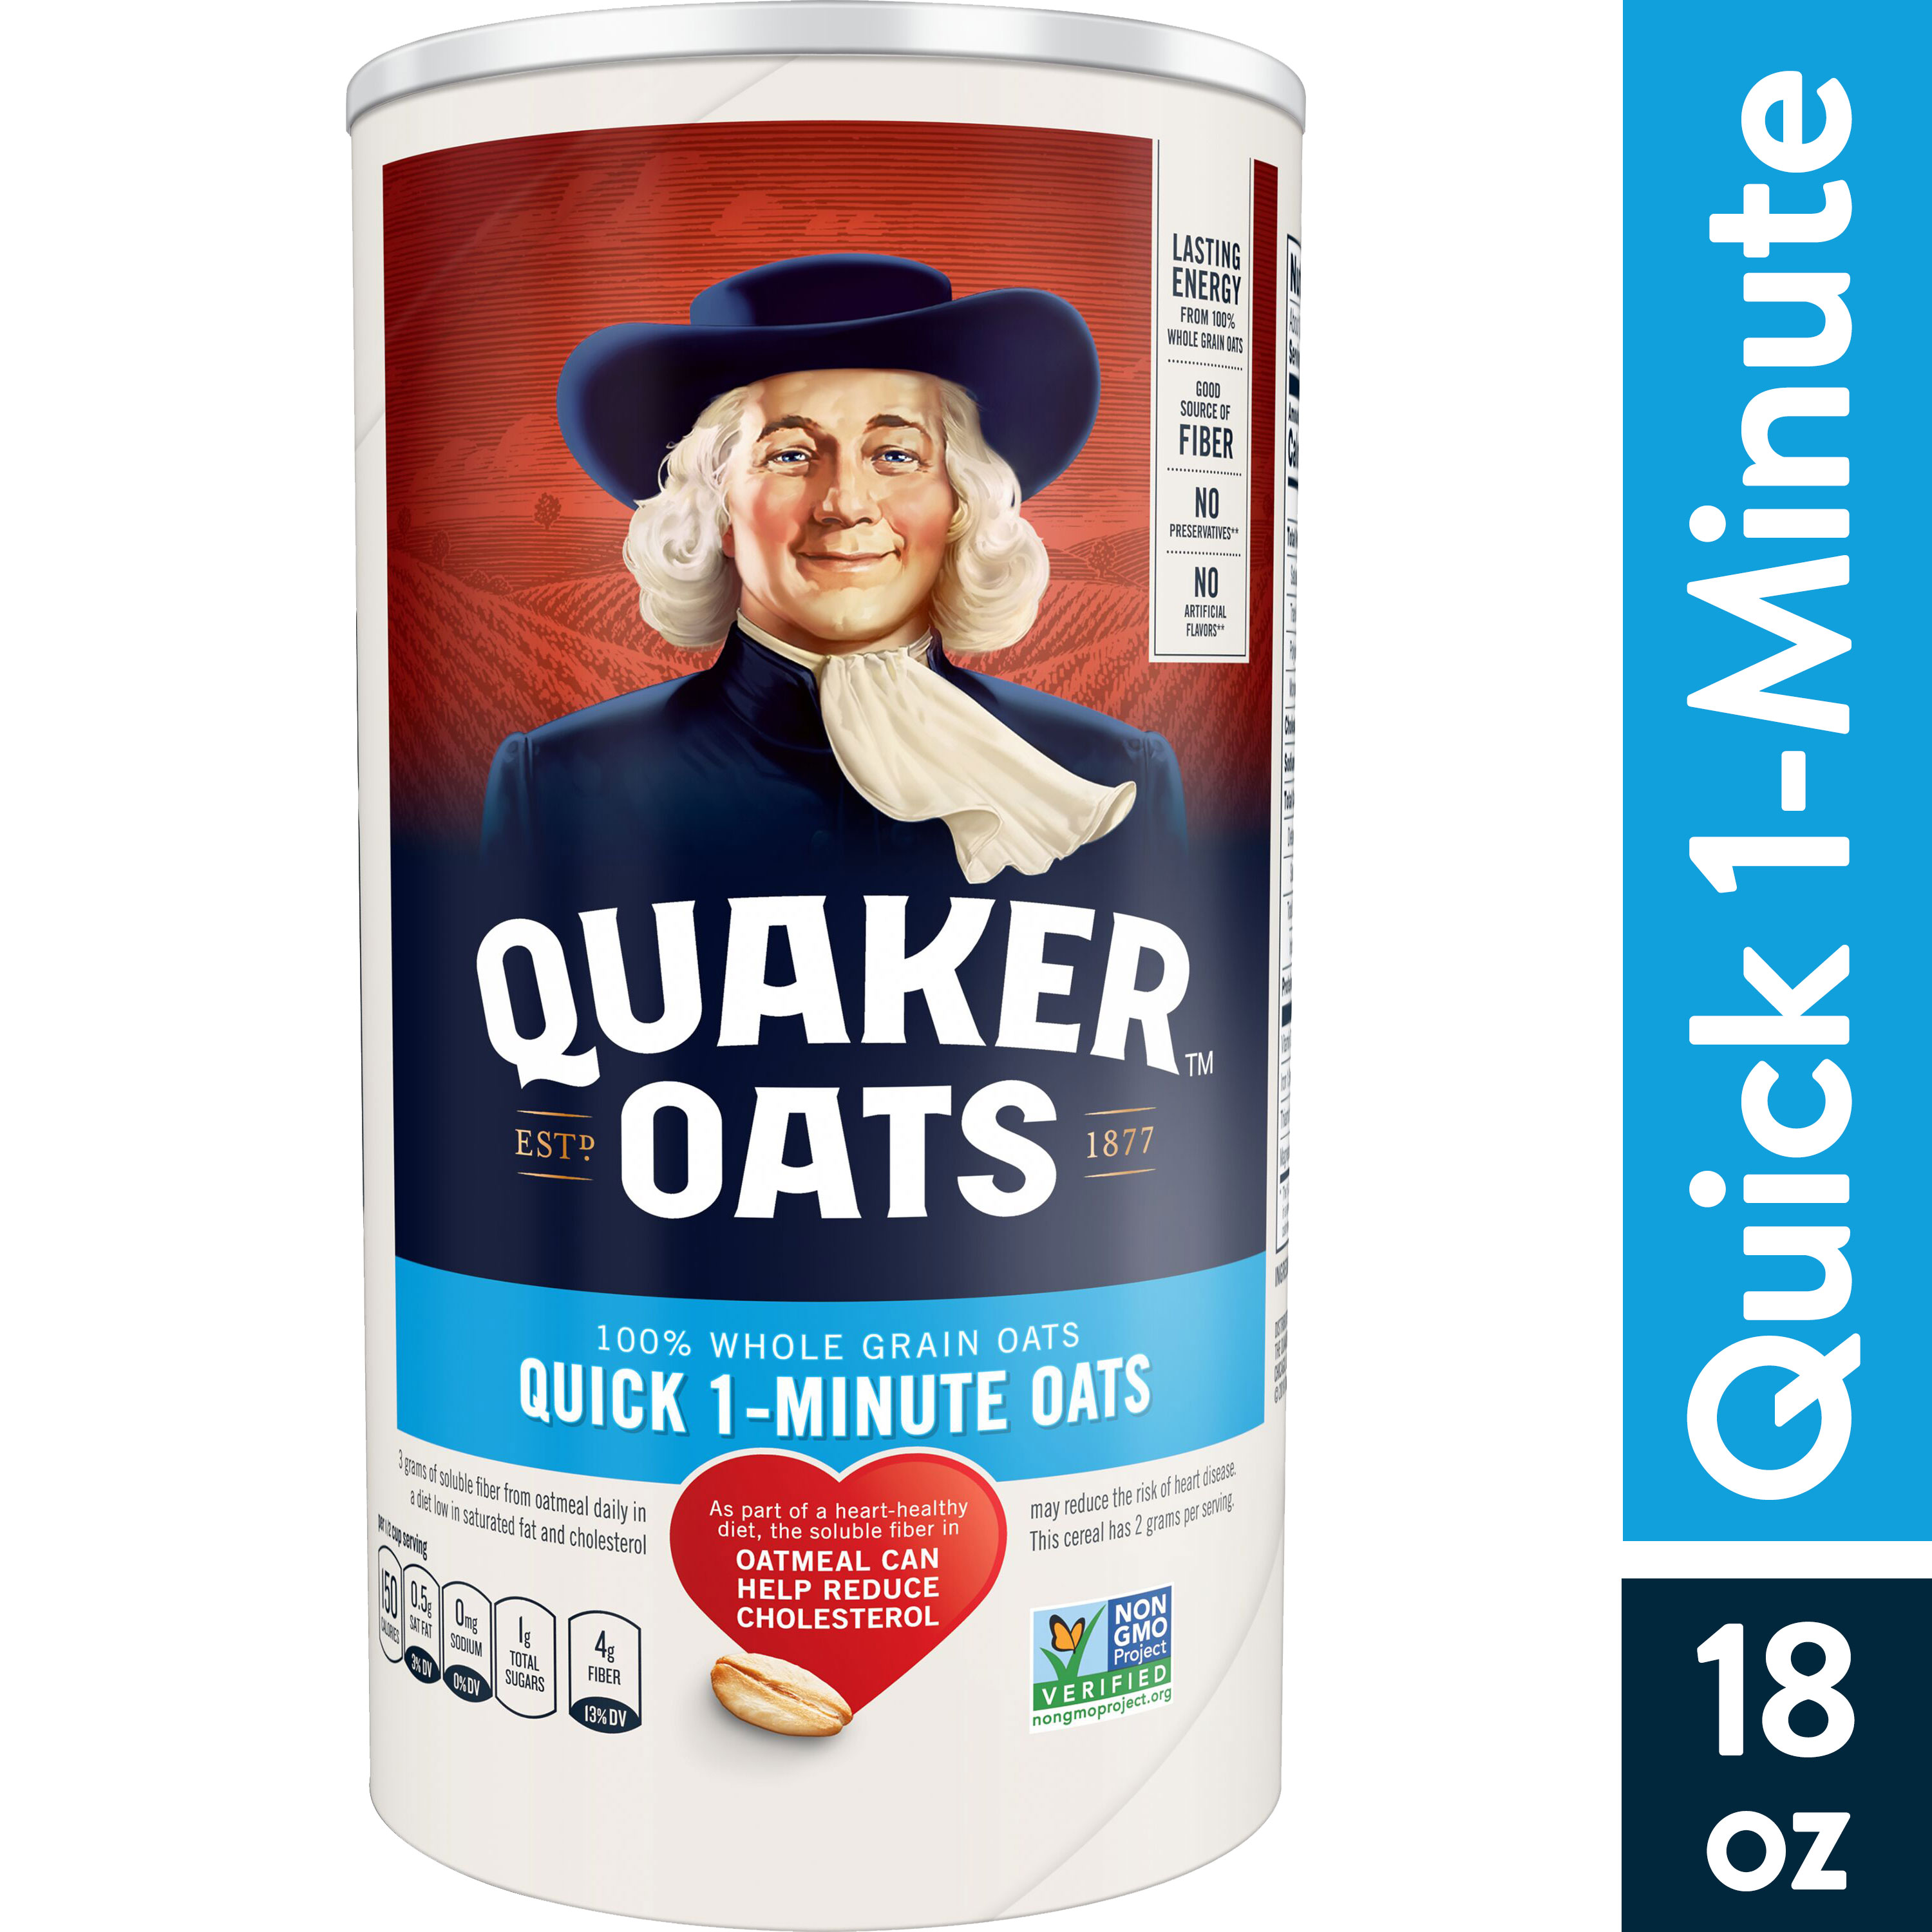 Quaker Whole Grain Oats, Quick Cook 1-Minute Oats, 18 oz Canister - image 1 of 9